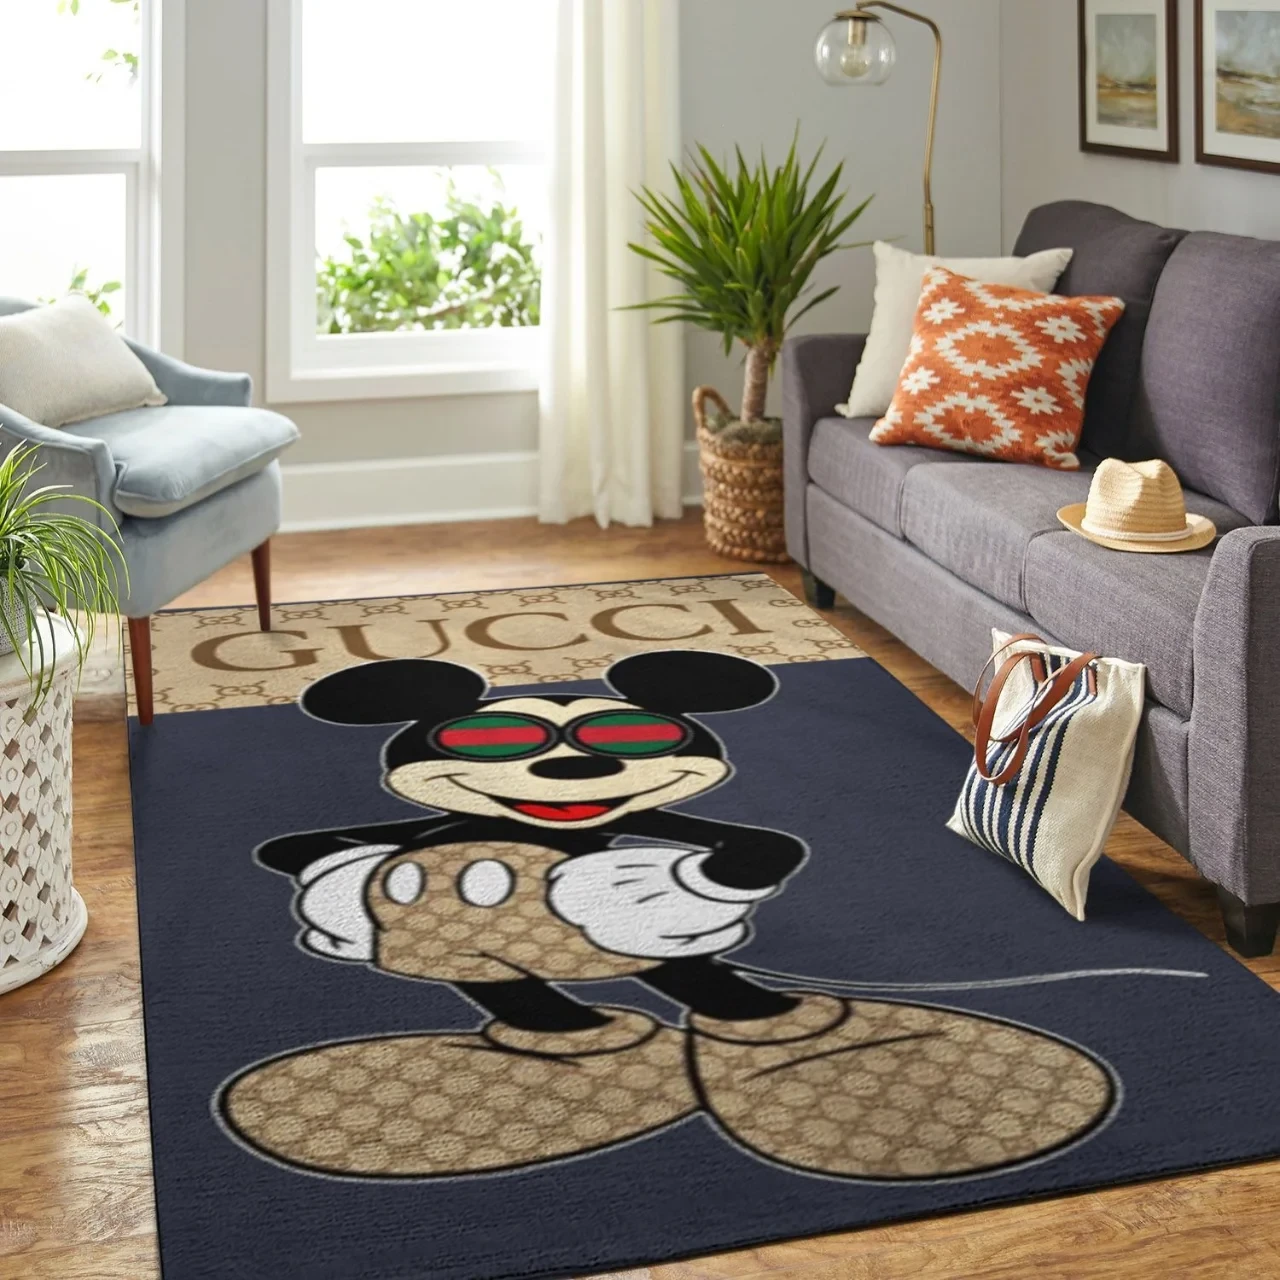 Gucci Fashion Brand Logo And Mickey Area Rugs Living Room Christmas Gift Floor Decor The US Decor - Indoor Outdoor Rugs